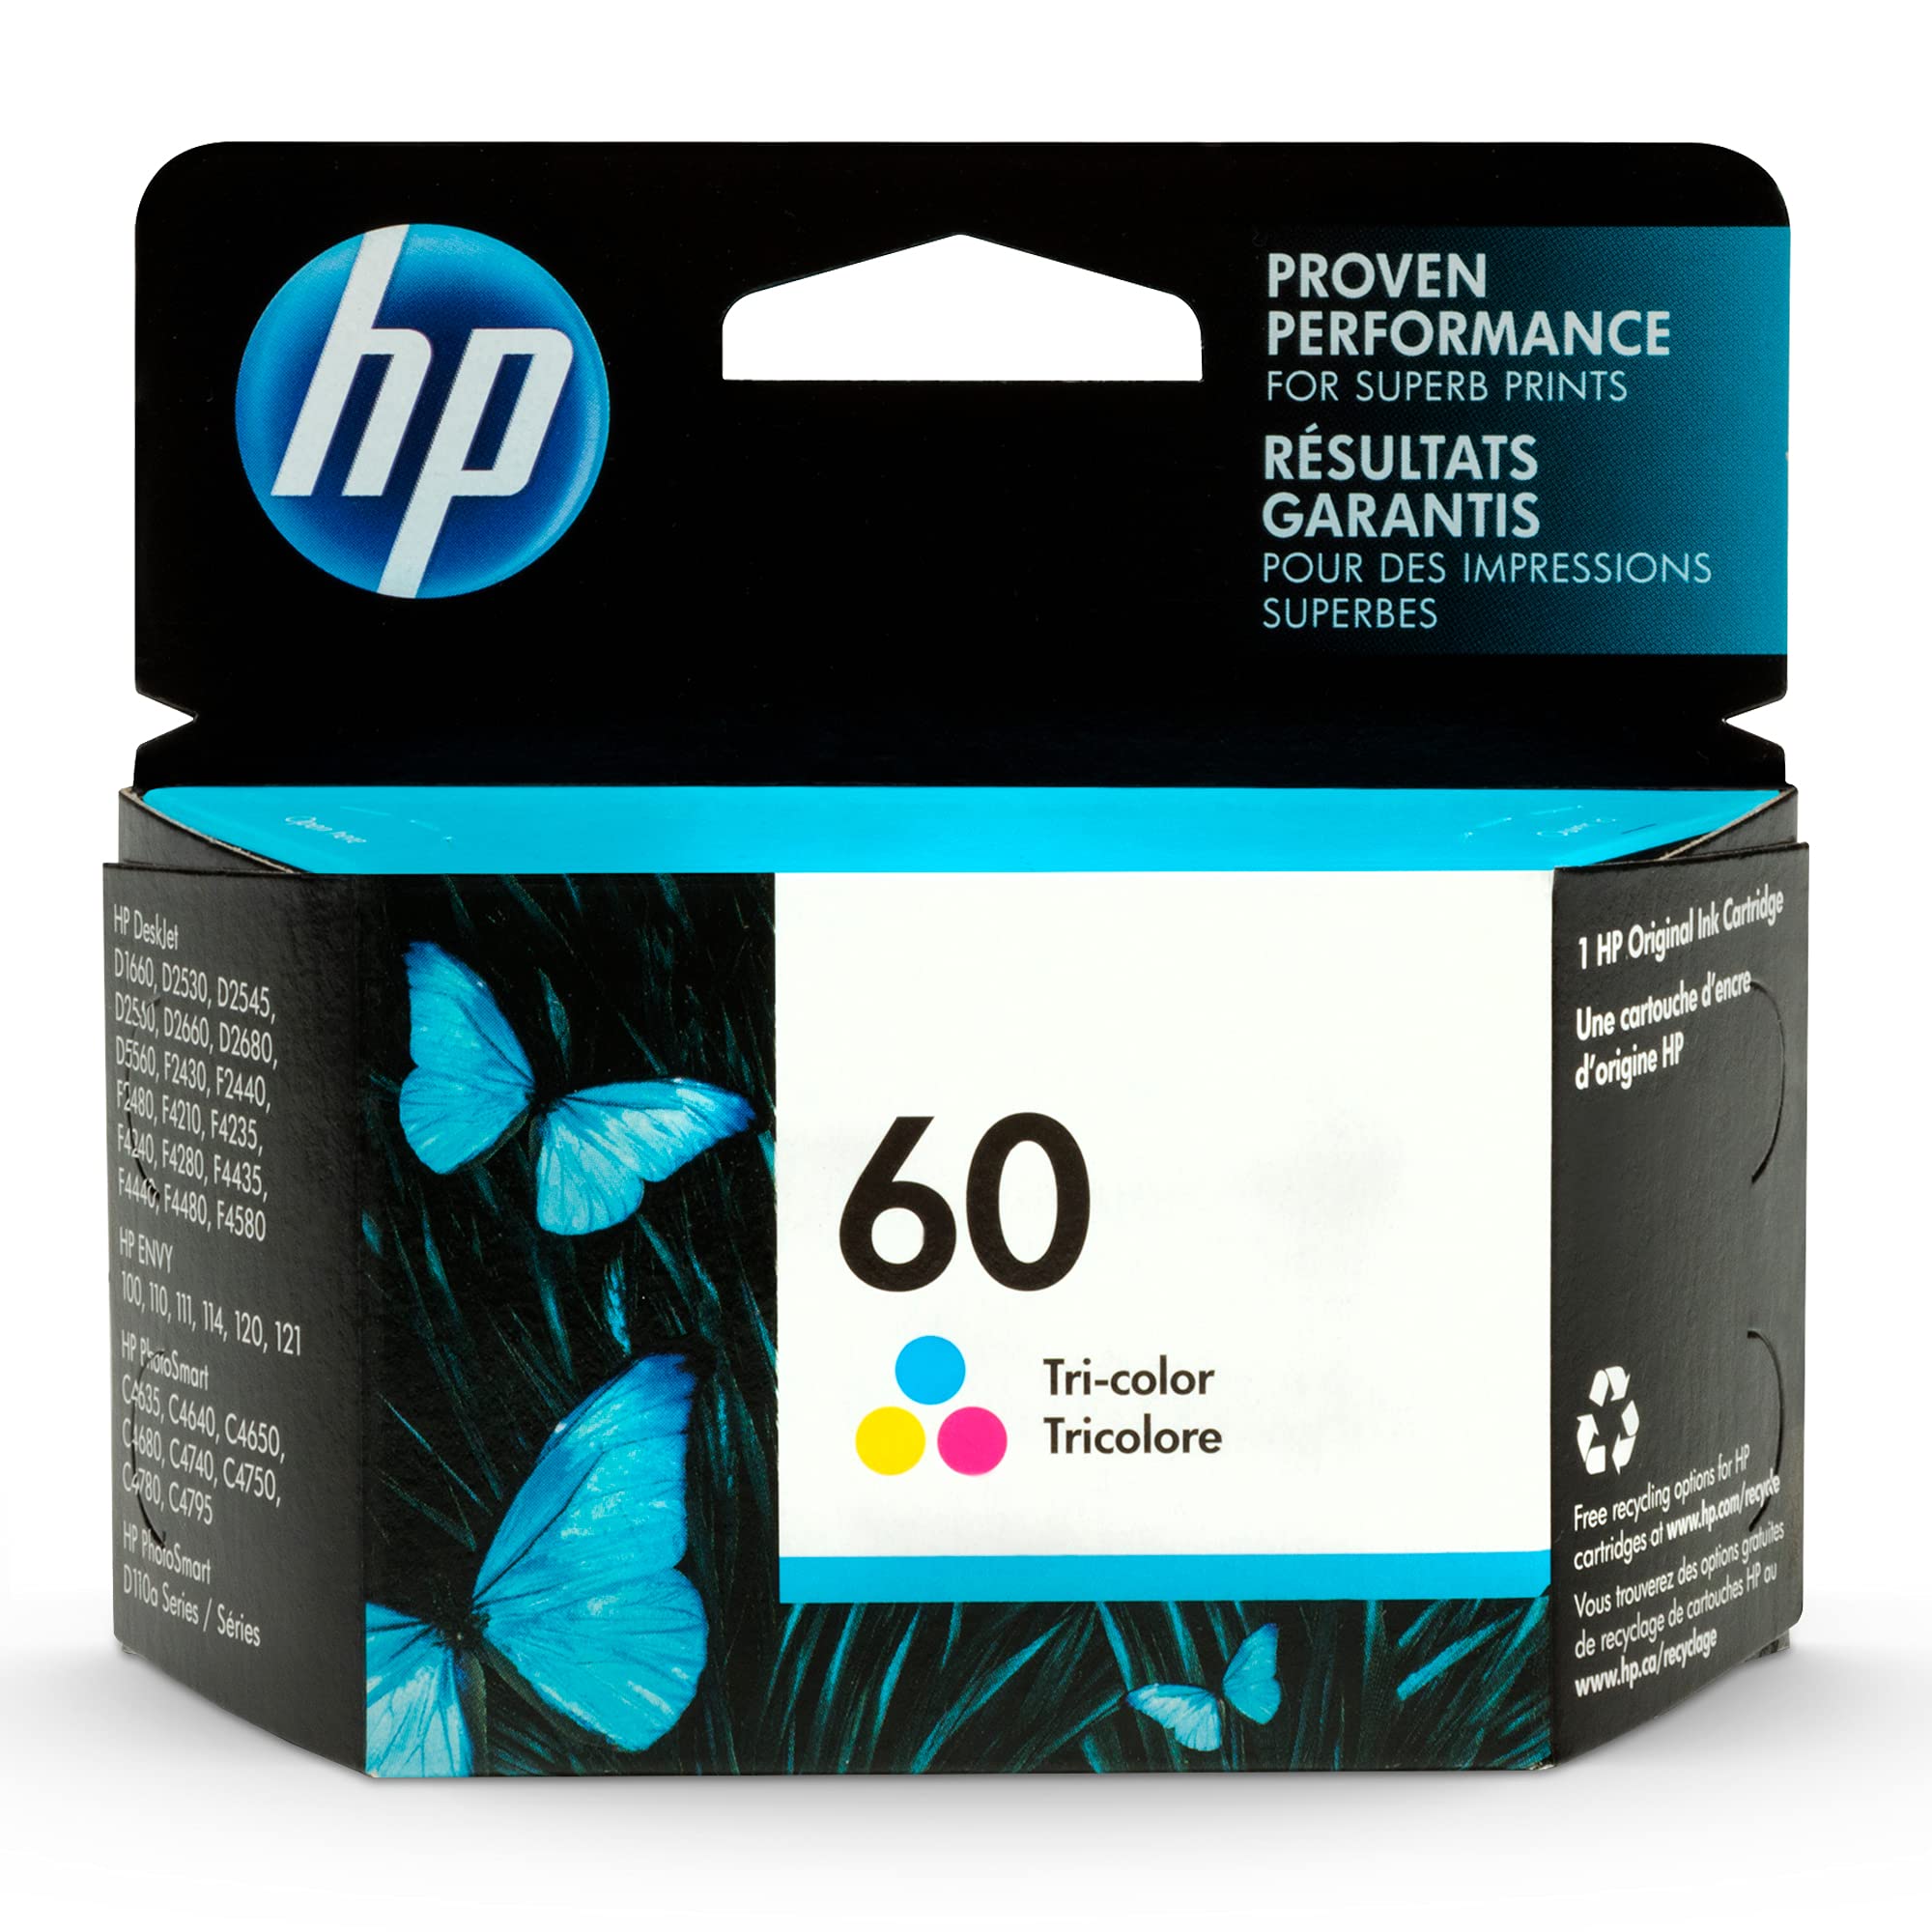 Original HP 60 Tri-color Ink Cartridge | Works with DeskJet D1660, D2500, D2600, D5560, F2400, F4200, F4400, F4580; ENVY 100, 110, 120; PhotoSmart C4600, C4700, D110a Series | CC643WN